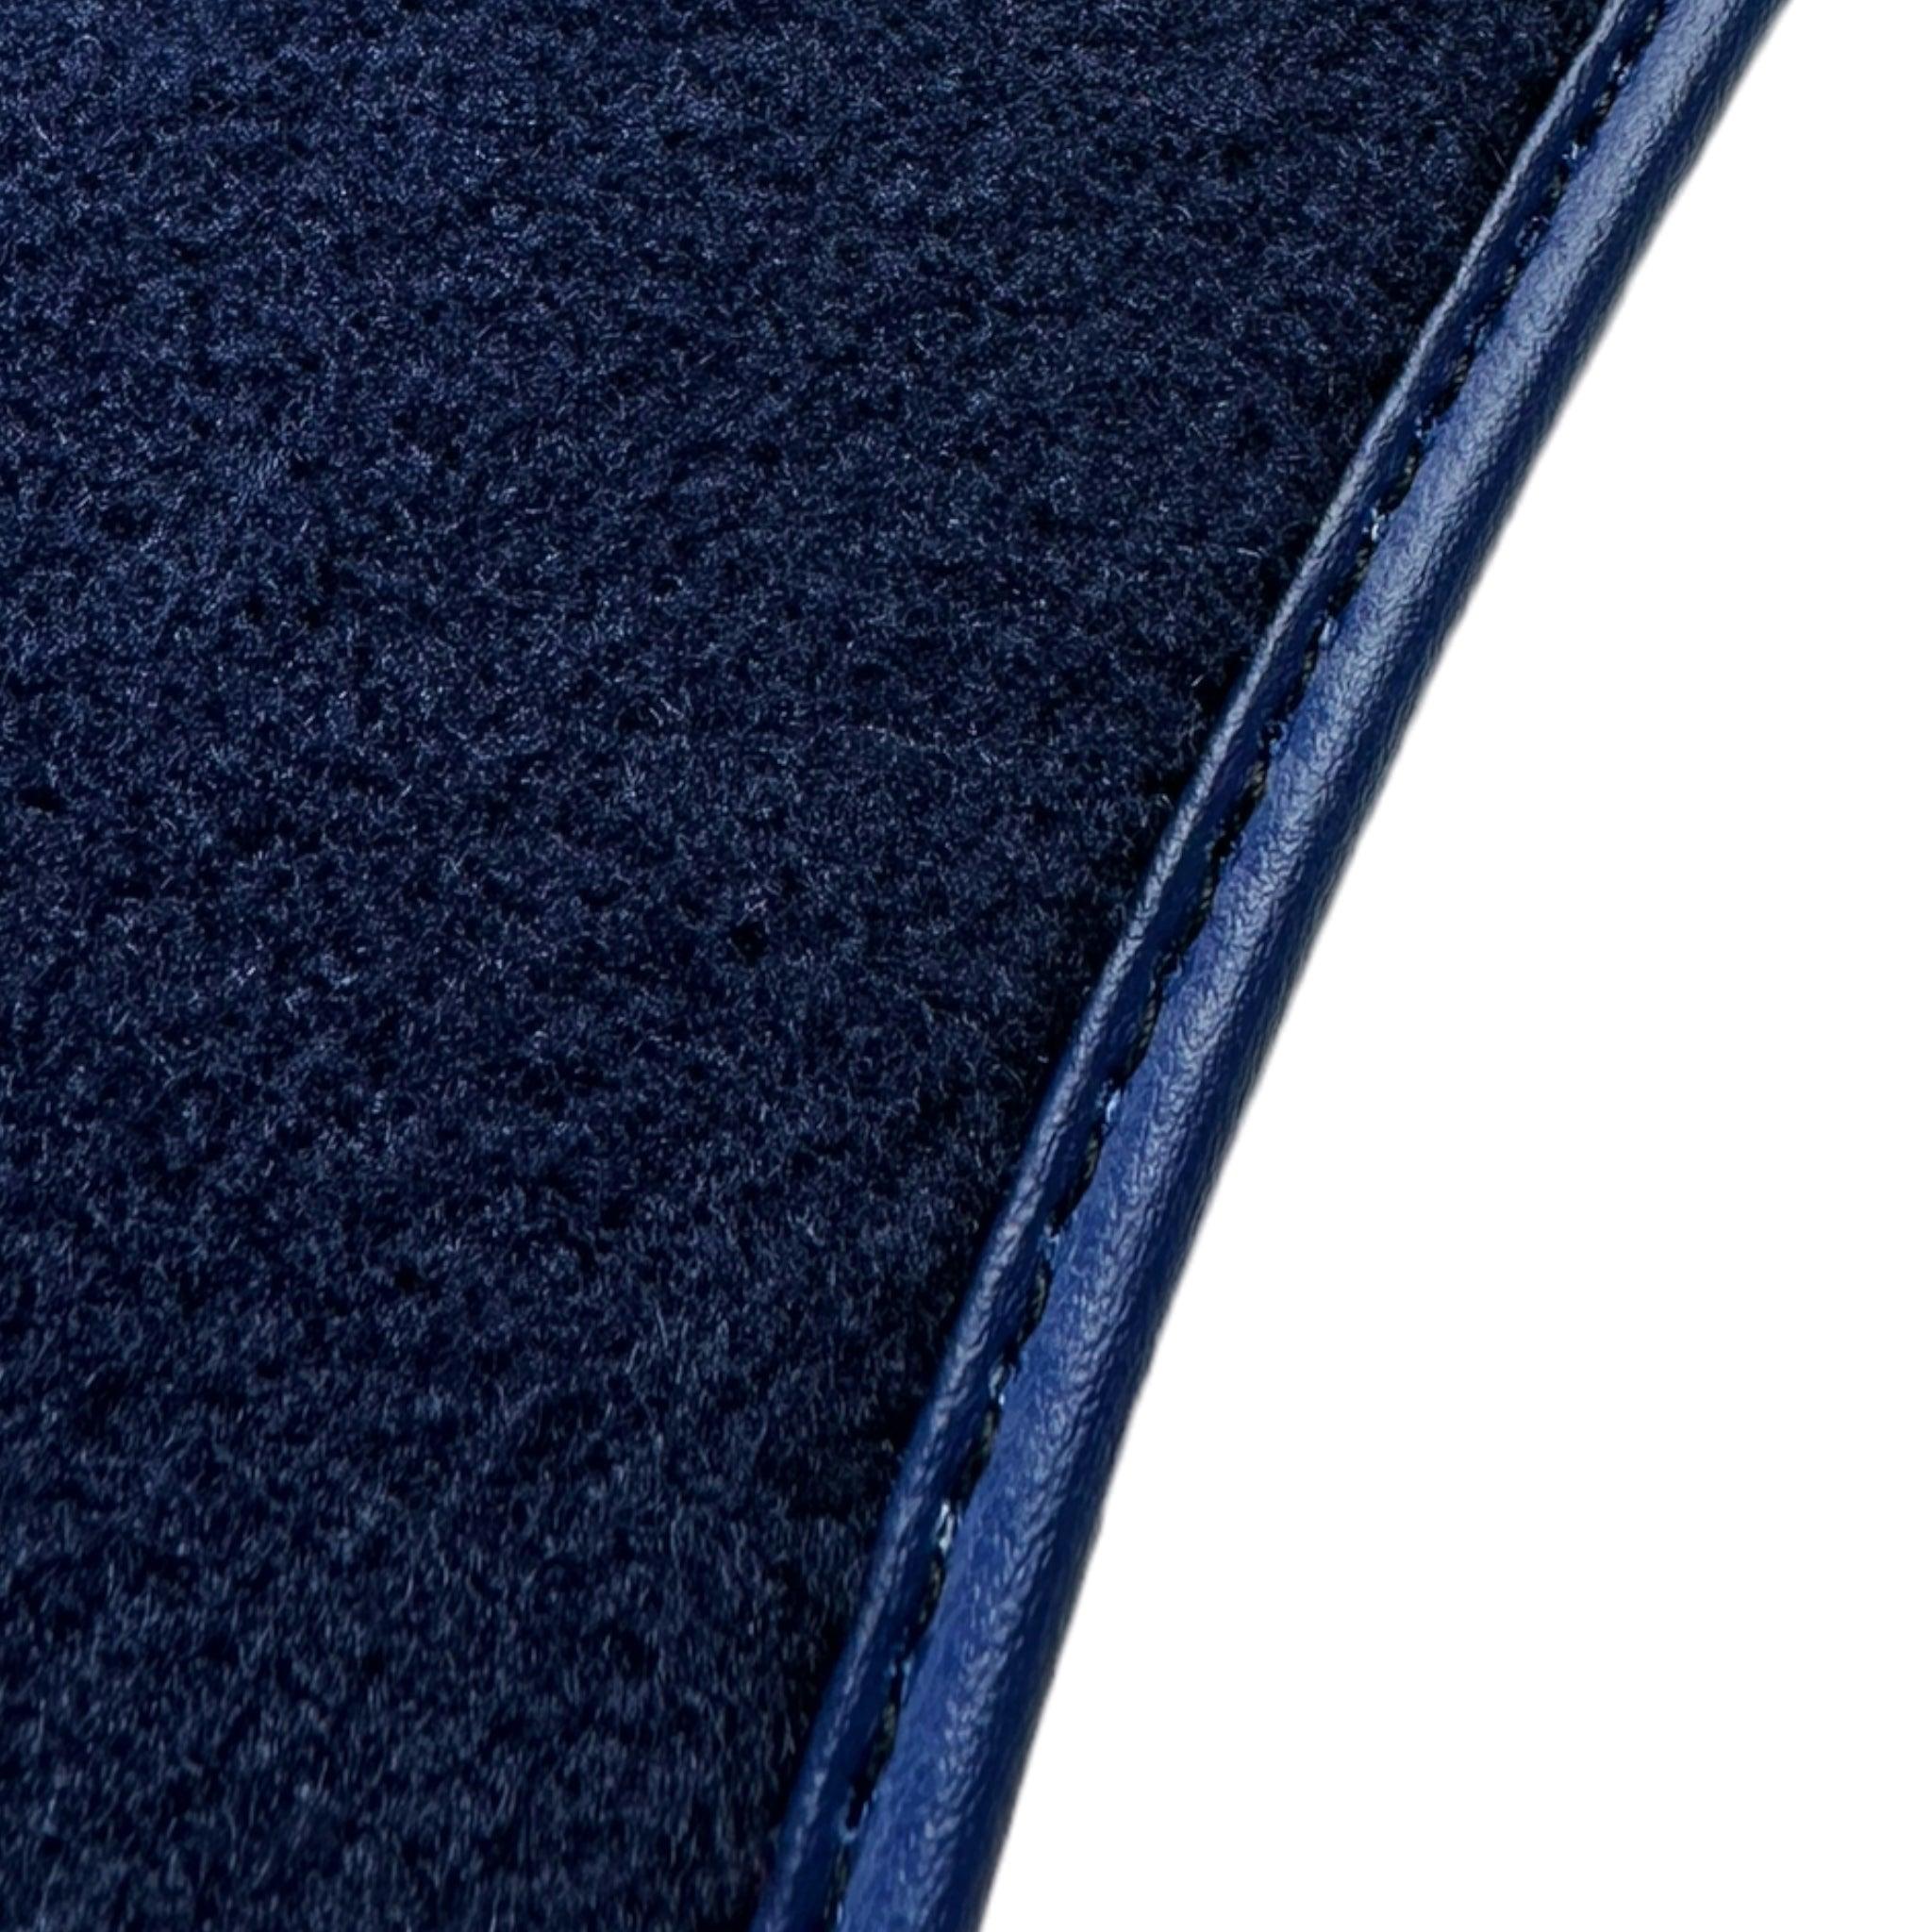 Dark Blue Floor Mats For Mercedes Benz S-Class C126 Coupe (1981-1991) | Limited Edition